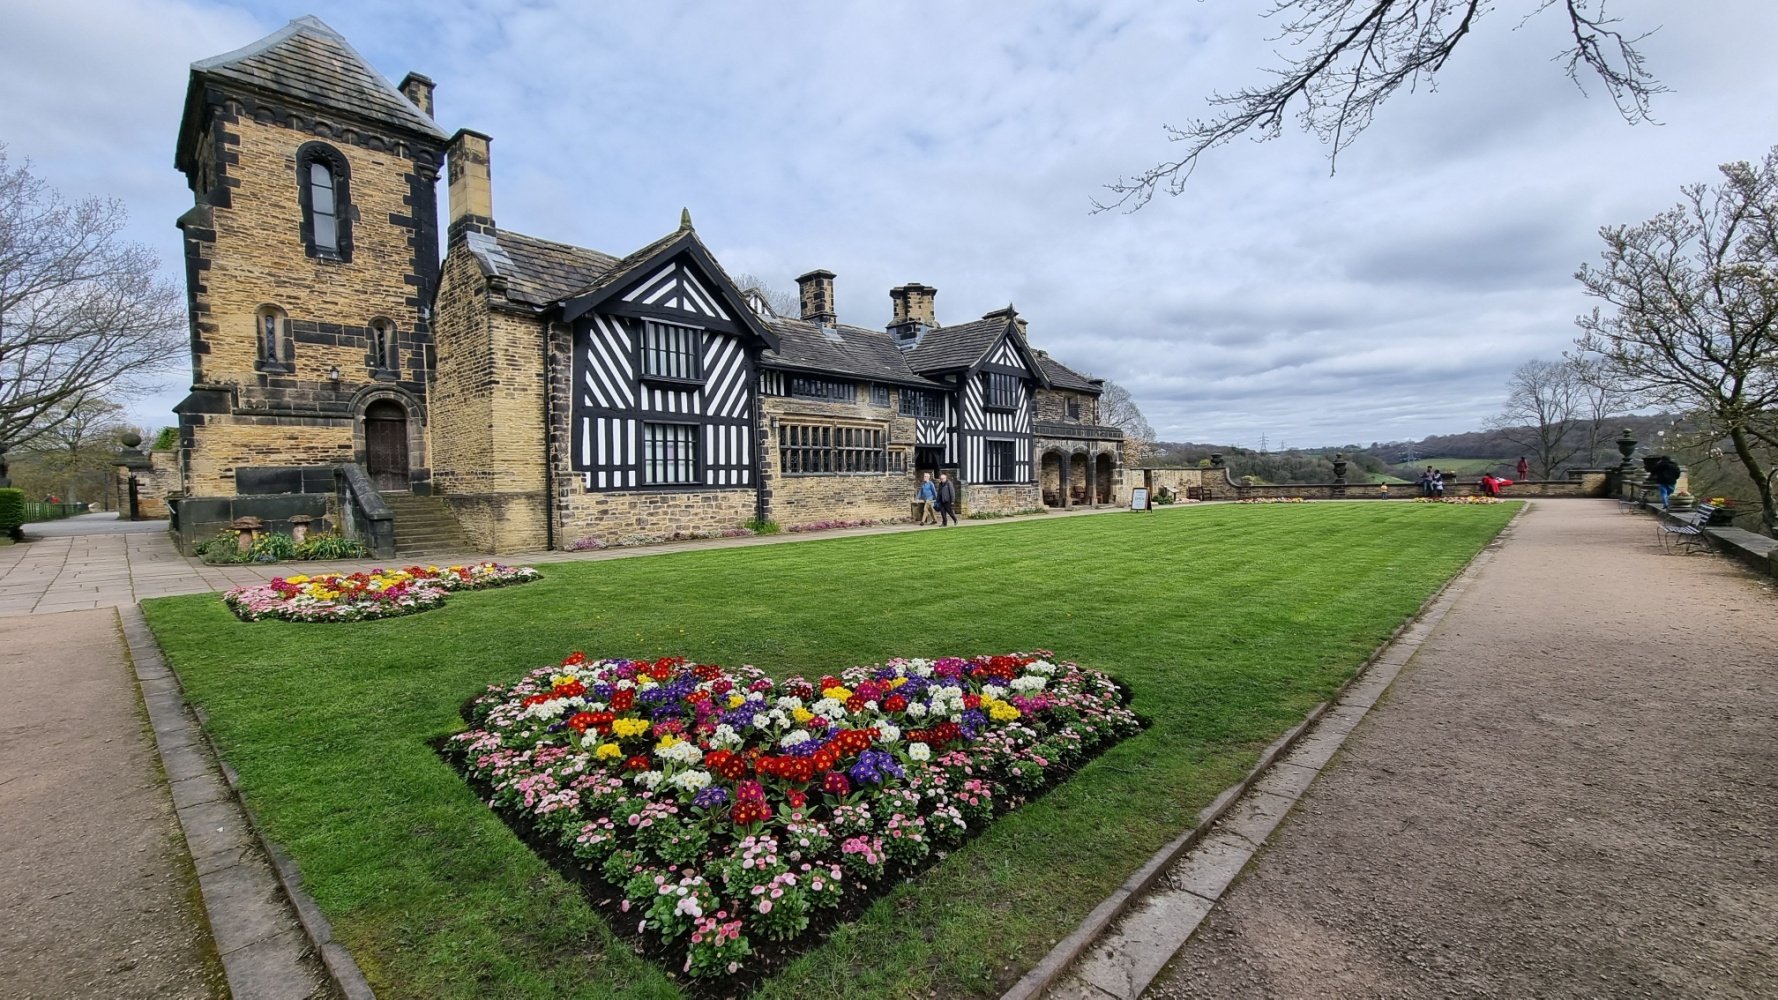 Image name shibden hall halifax west yorkshire the 24 image from the post A look at the history of Shibden Hall, with Dr Emma Wells in Yorkshire.com.